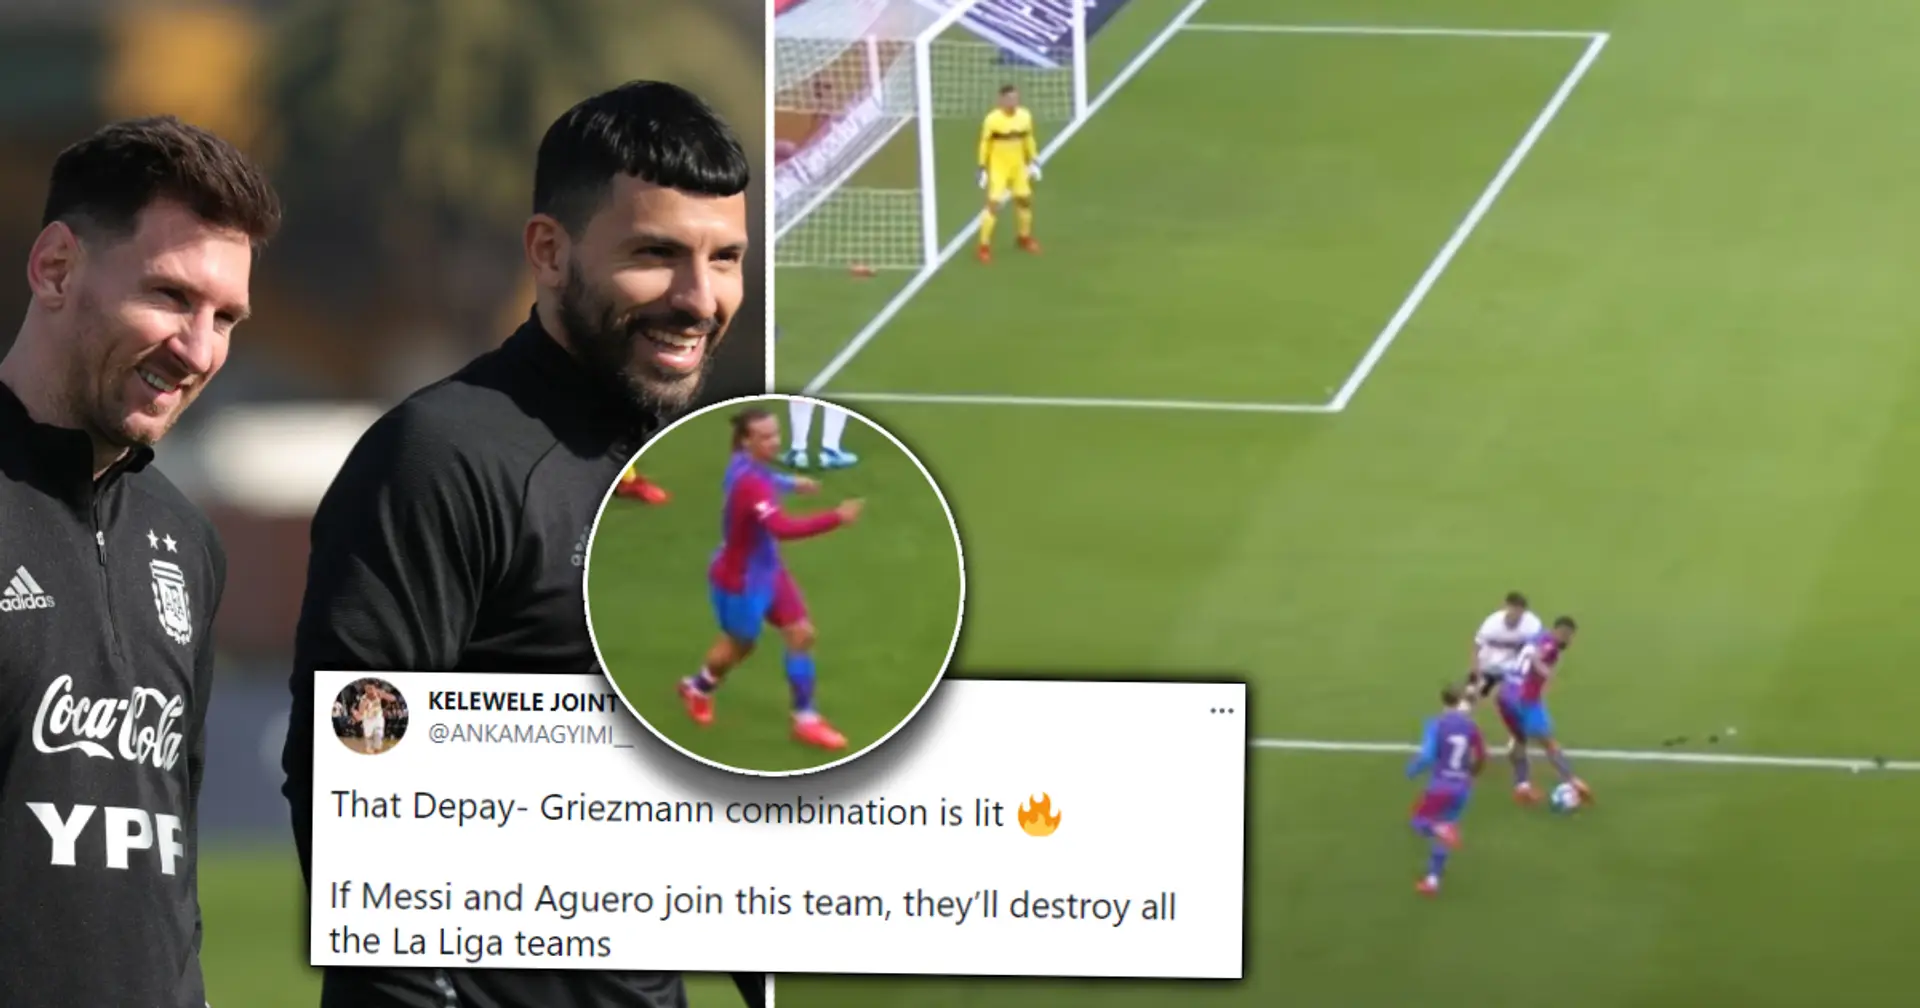 Depay and Griezmann set up beautiful Barca goal, fans wonder what happens when Messi and Aguero join